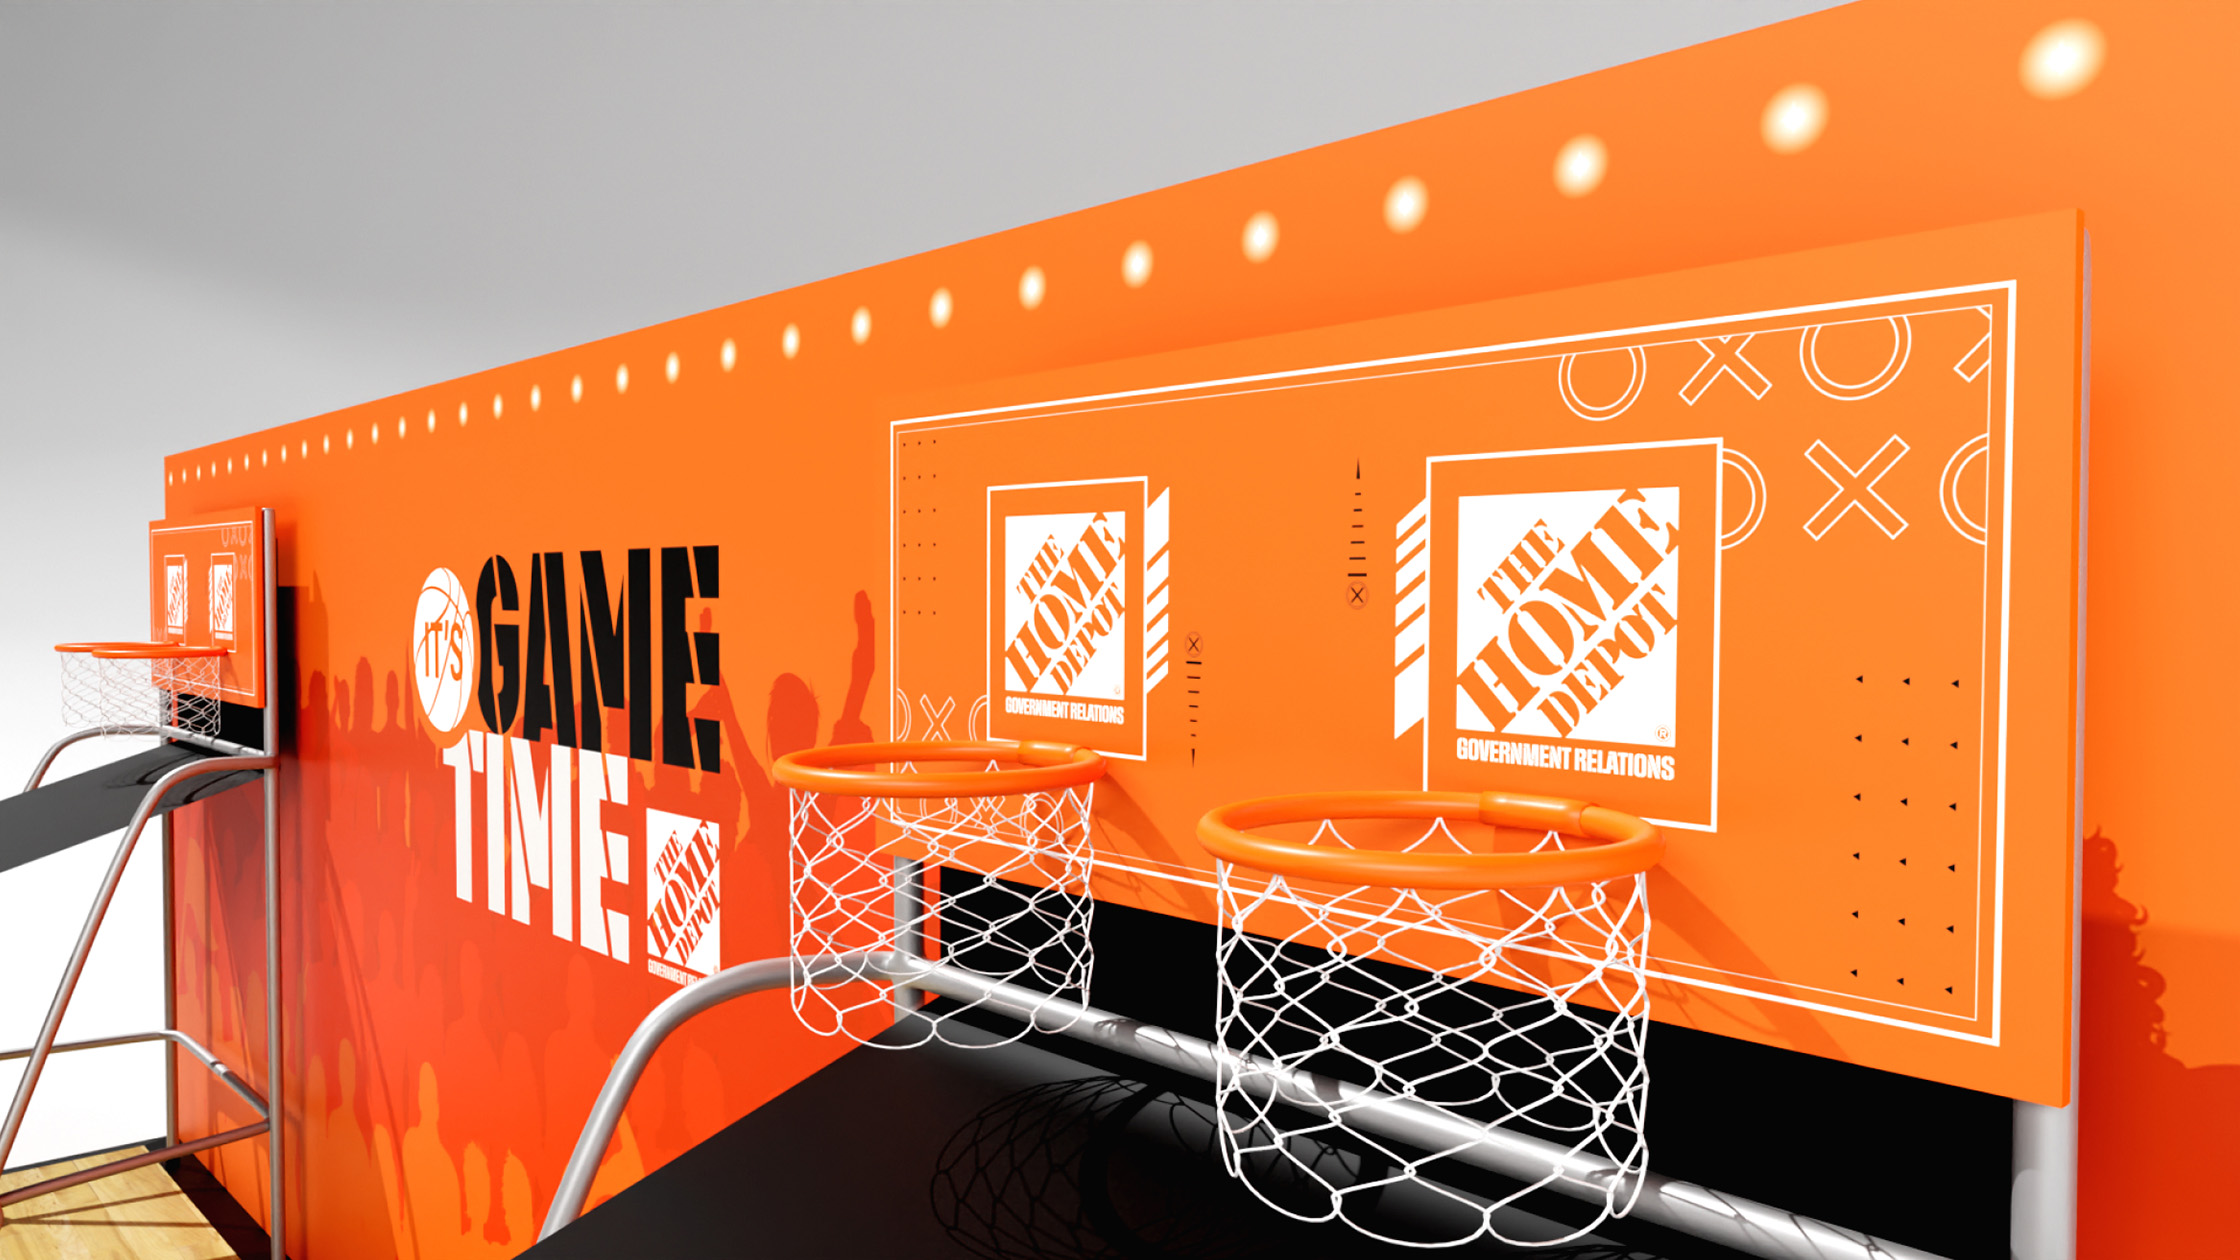 An orange basketball game setup with two hoops and backboards, branded with The Home Depot logo. The backboards feature white lines and graphics. The background wall reads “It’s Game Time” in large black and white letters against an orange backdrop.